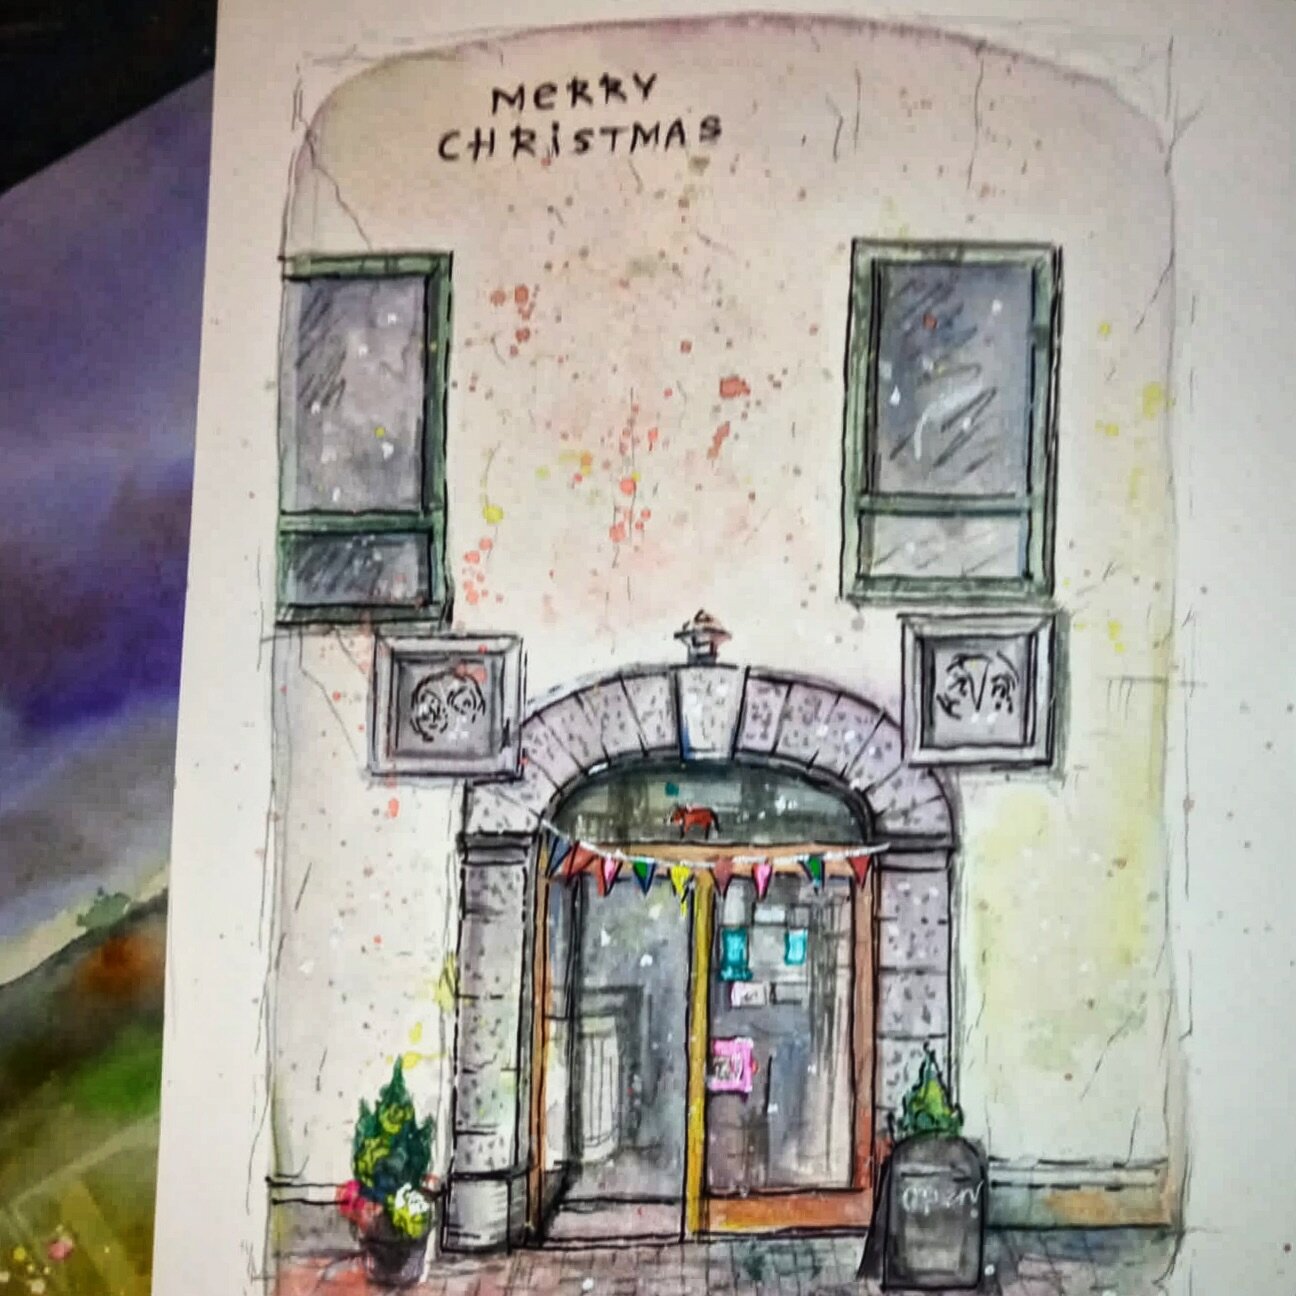 Fethard Horse Country Experience museum

🎨Water colour art by @nikolina8246.

Join us on Sunday at 2pm.
Water colour art clas at FHCE.

For booking DM&hearts;️